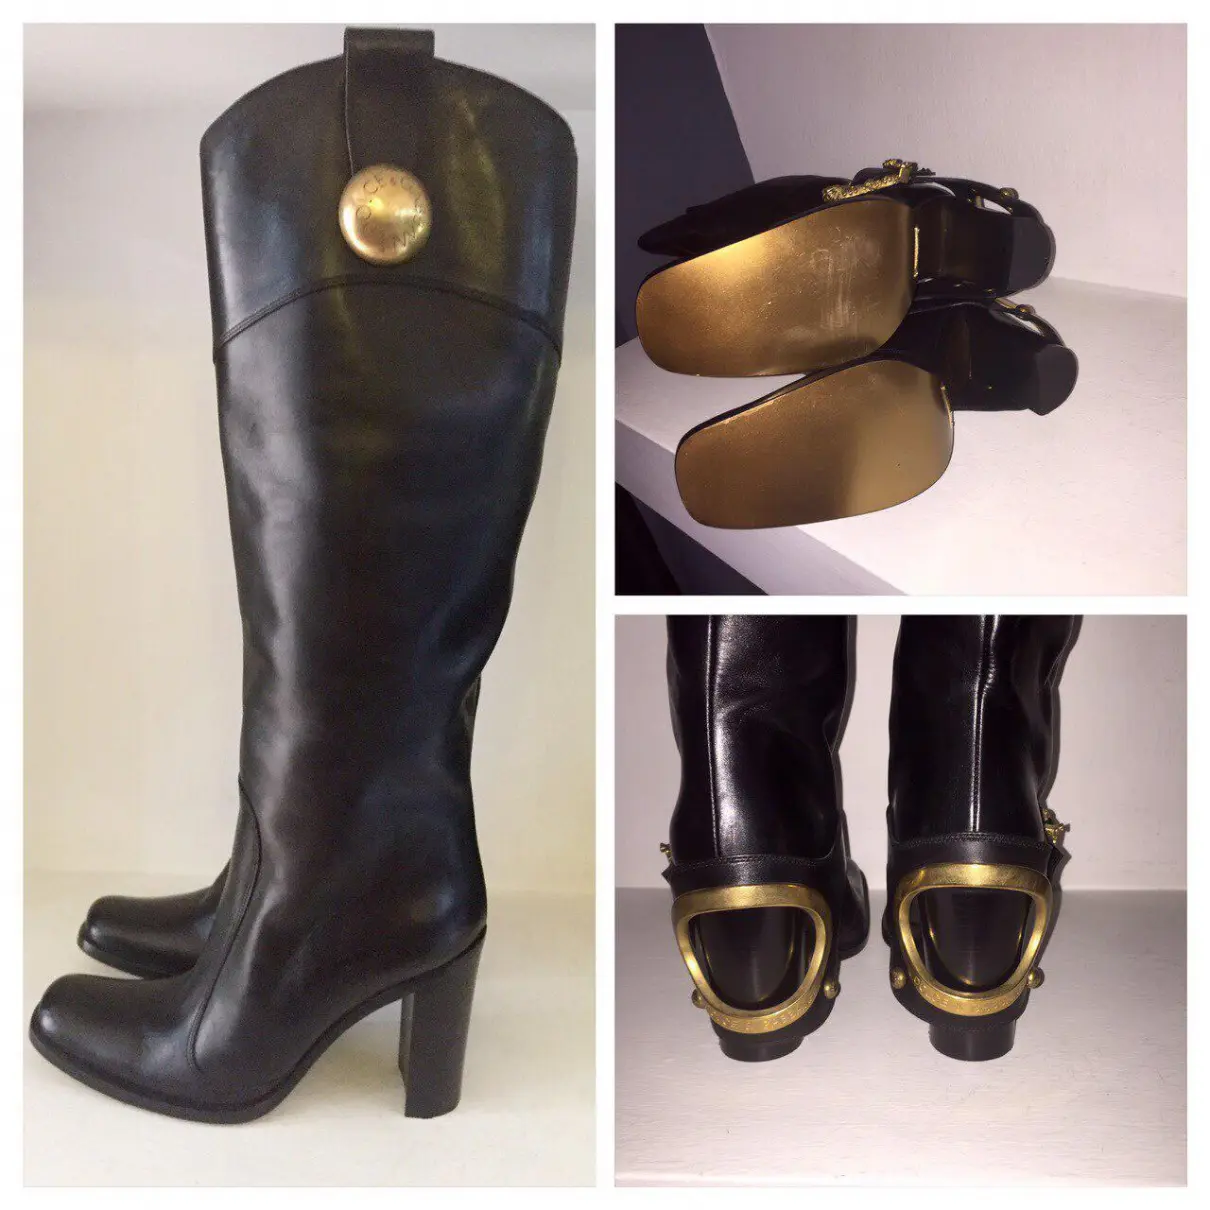 Dolce & Gabbana Leather boots for sale - Vintage